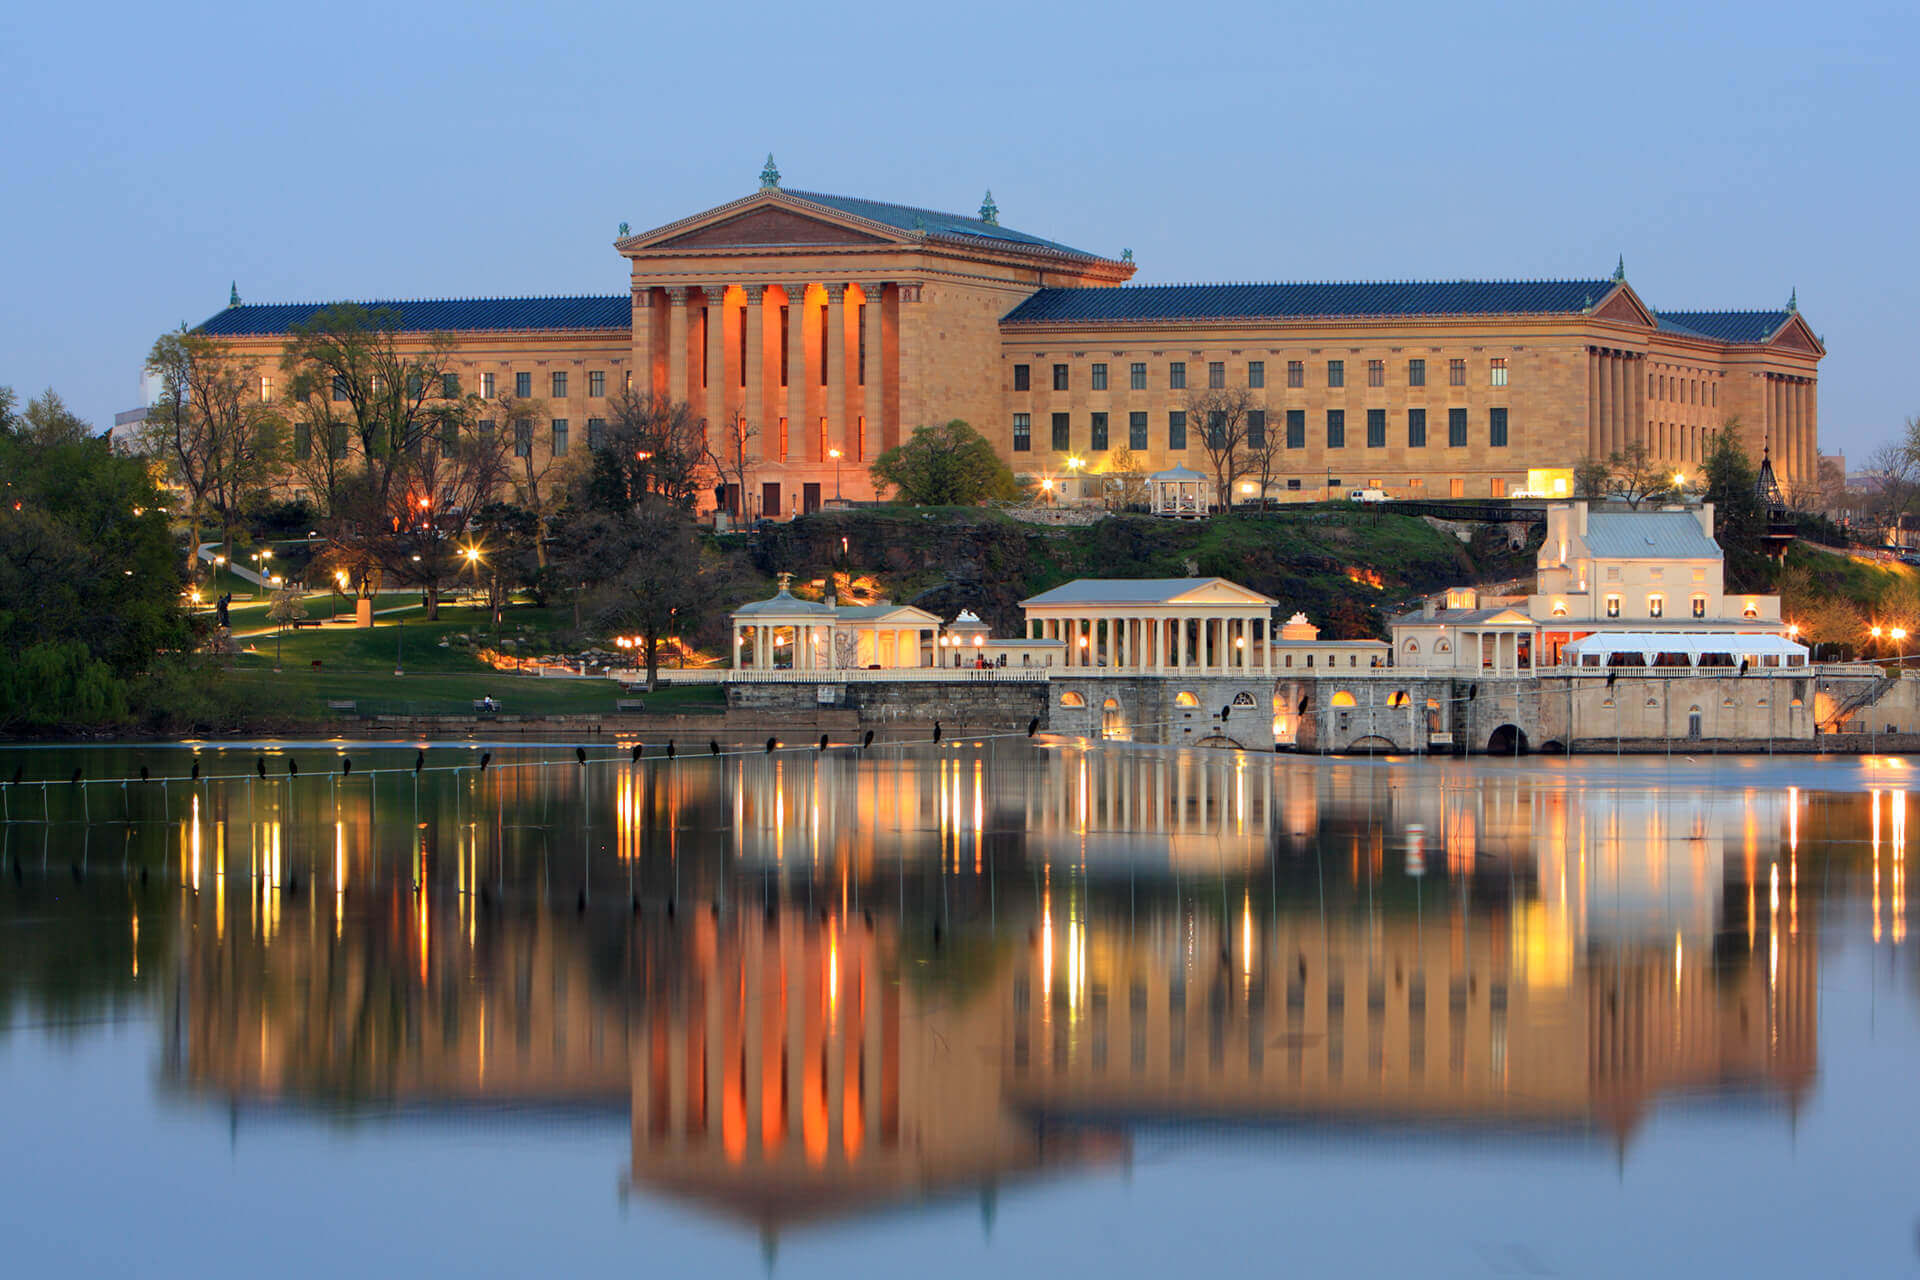 The Philadelphia Museum of Art and Water Works